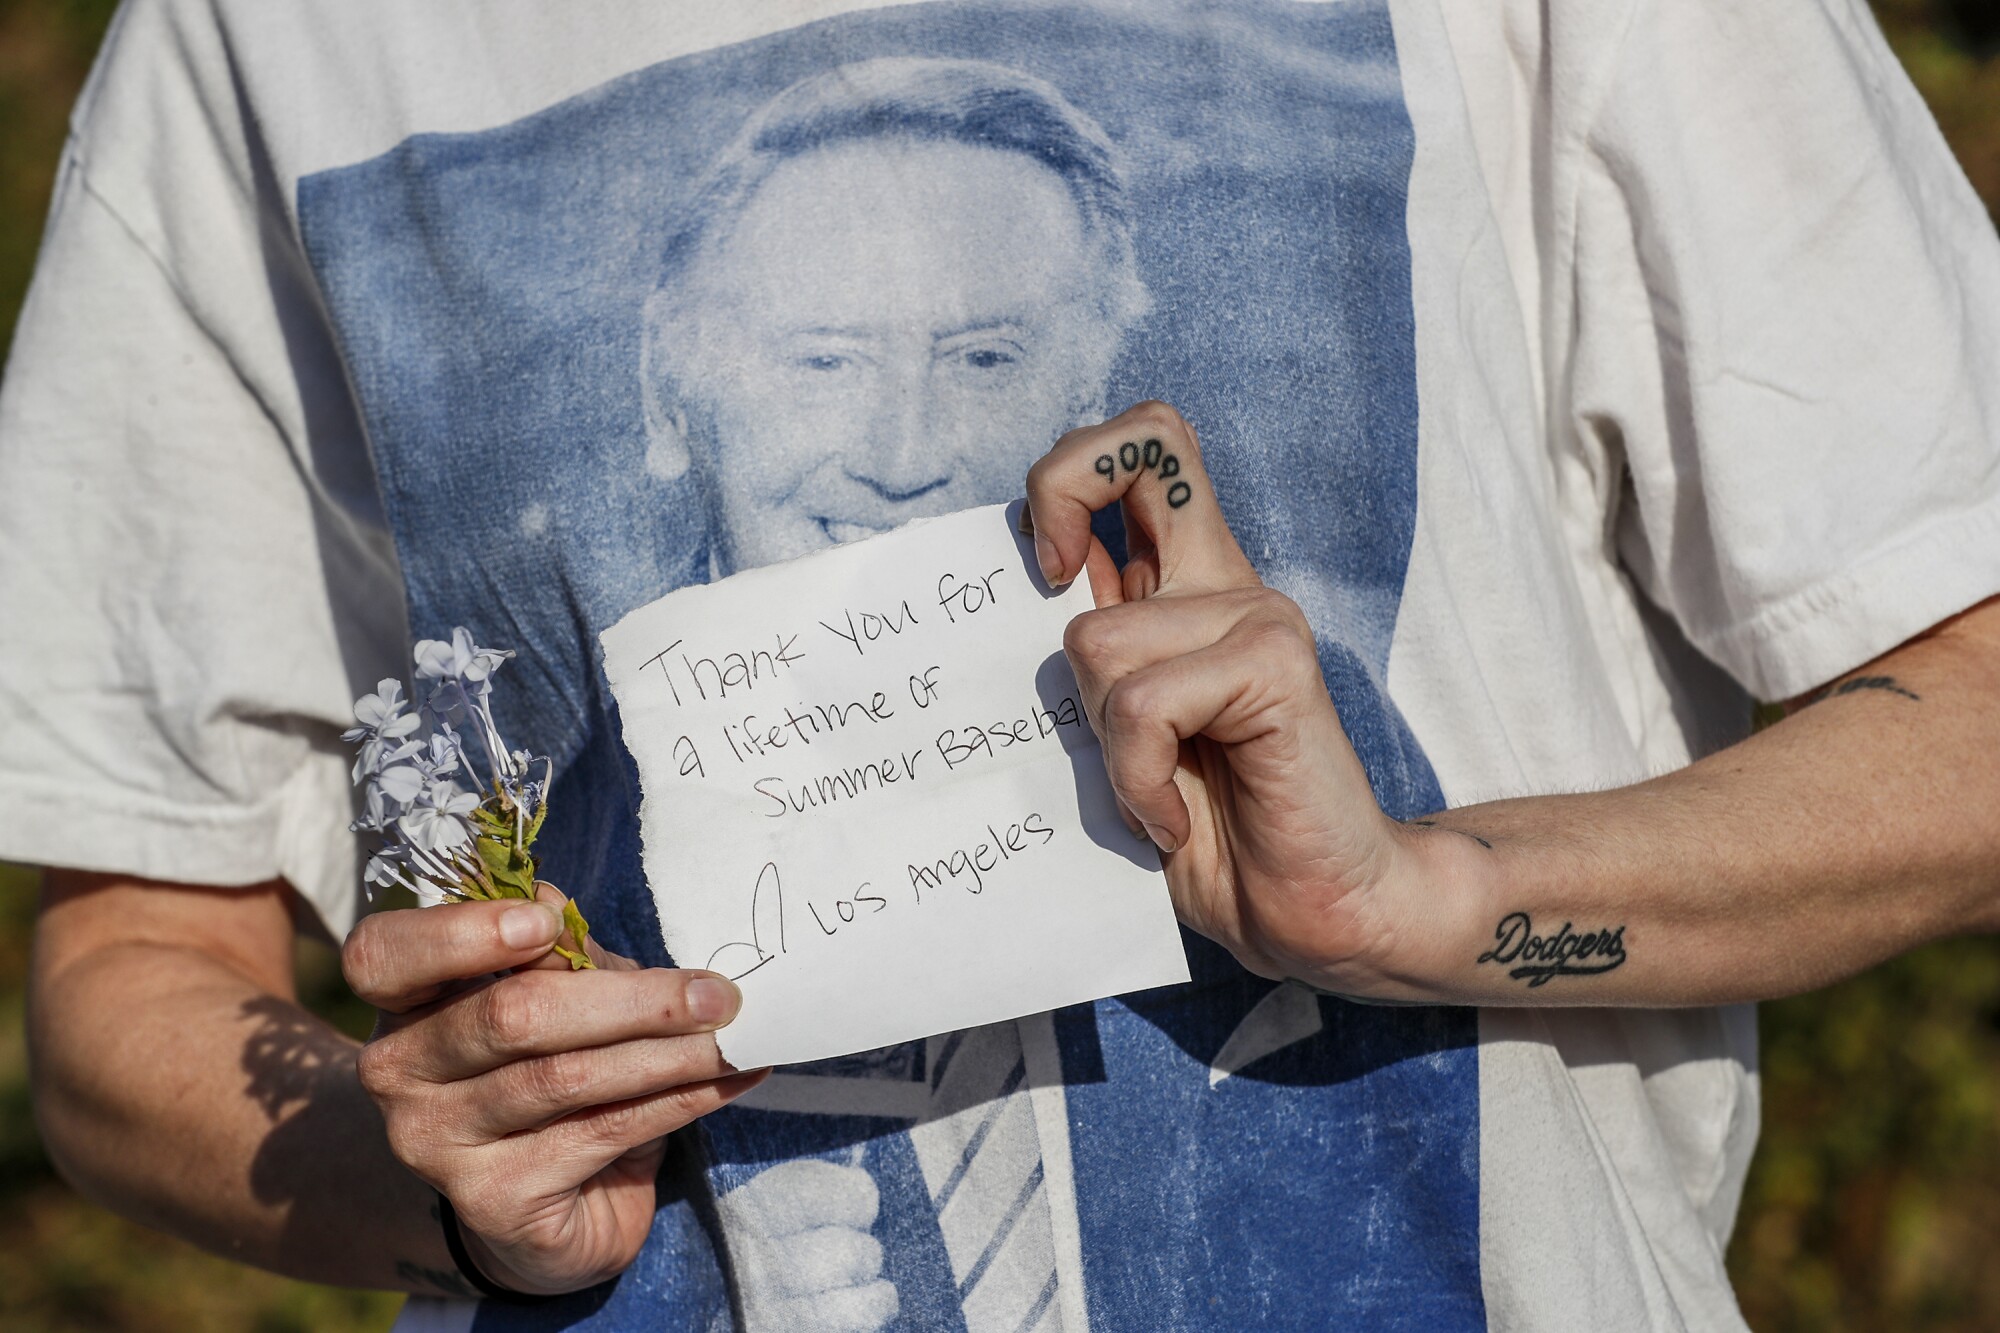 Meagan Newhouse shows a note and flowers that she would leave at a shrine for Dodgers announcer Vin Scully.